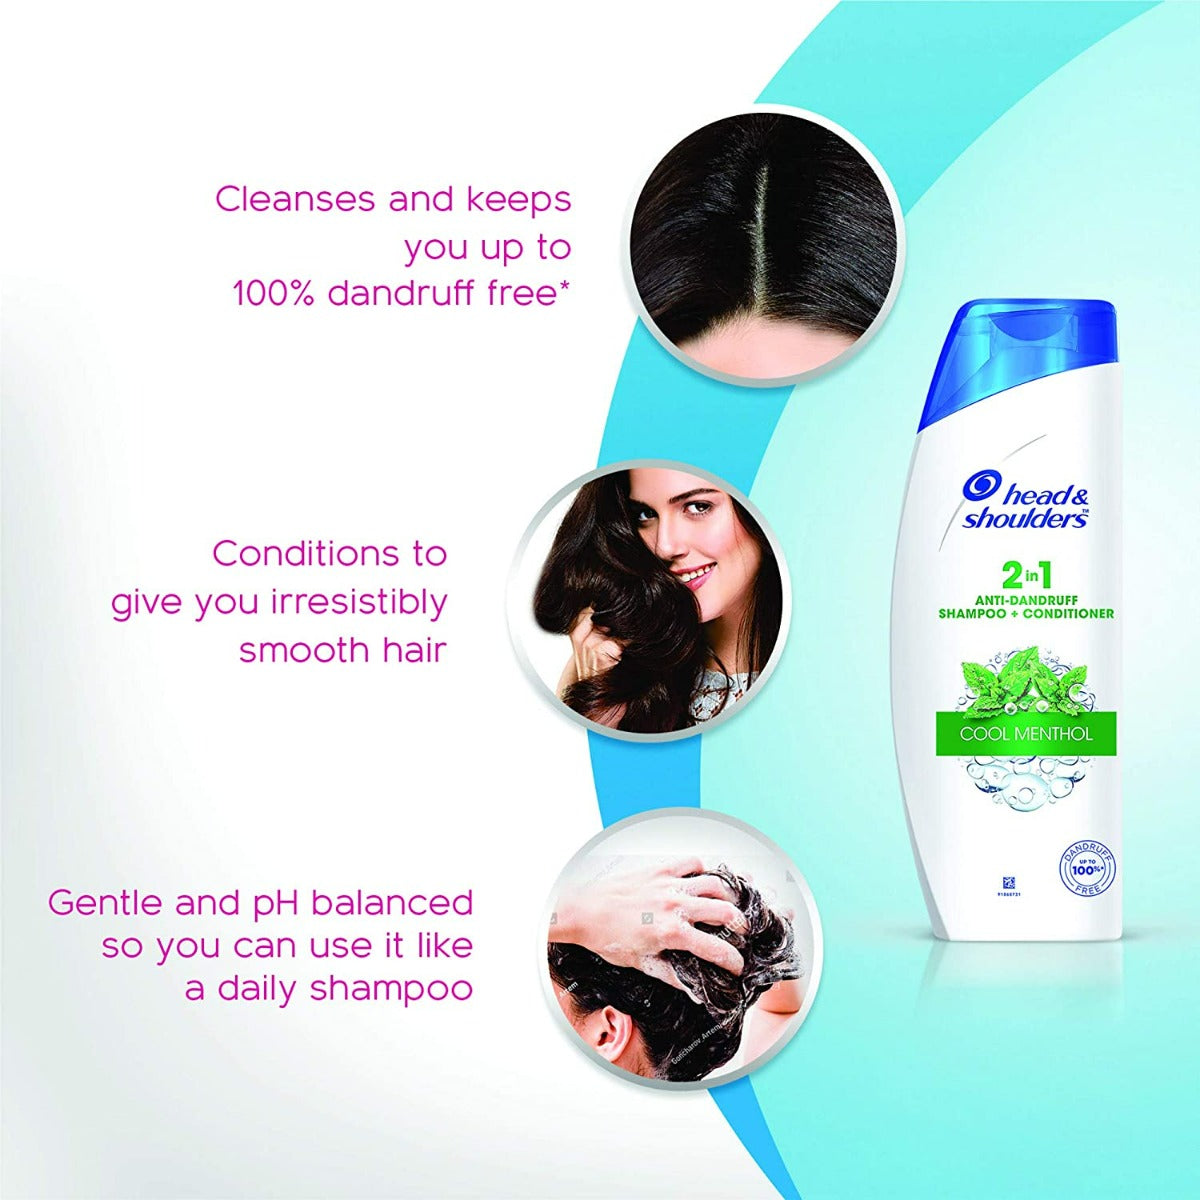 Head &amp; Shoulders 2-in-1 Cool Menthol Anti Dandruff Shampoo + Conditioner for Women and Men (180ml)